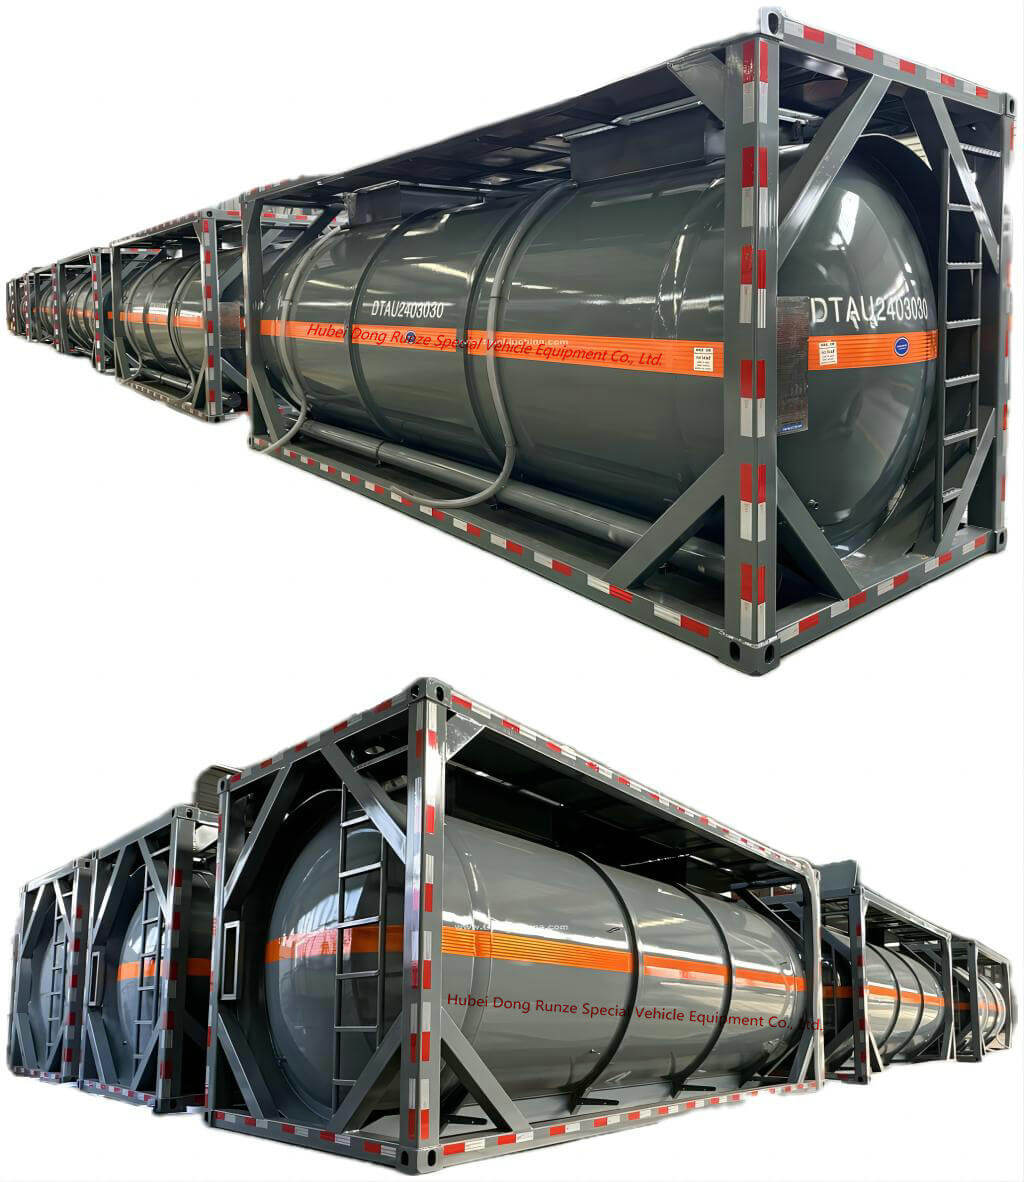 10 Units T14 ISO Tank Container For Hydrofluoric Acid Road Transport Export to India